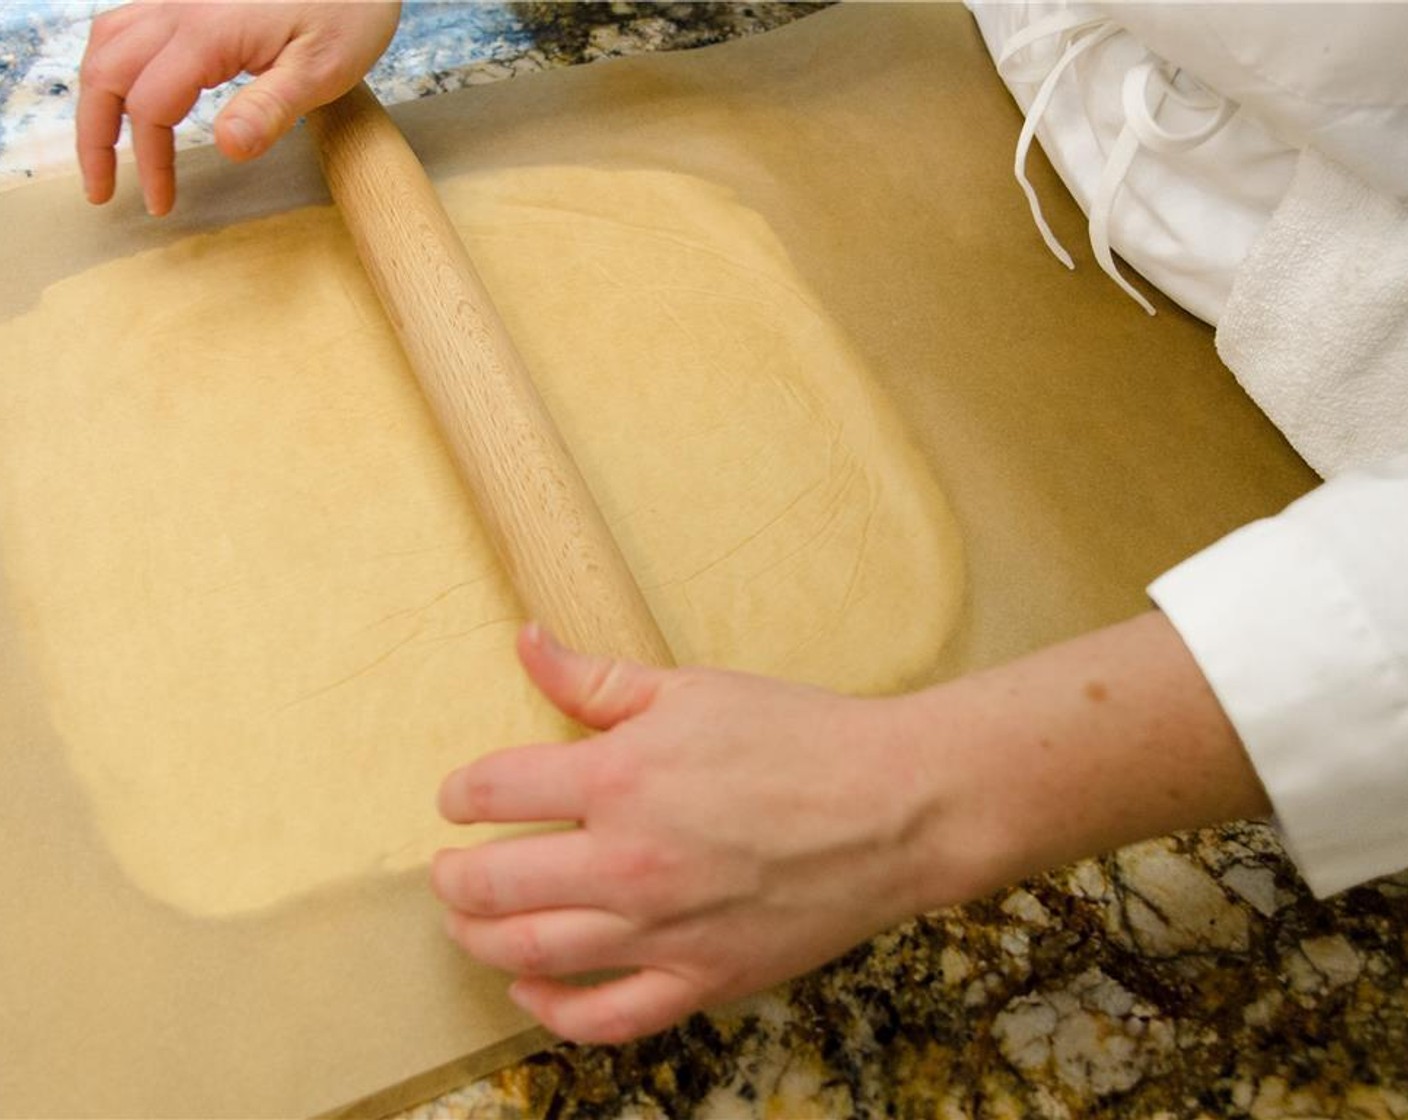 step 6 Roll the unwrapped dough between two pieces of plastic wrap or parchment paper to a square twice the size of the butter block.